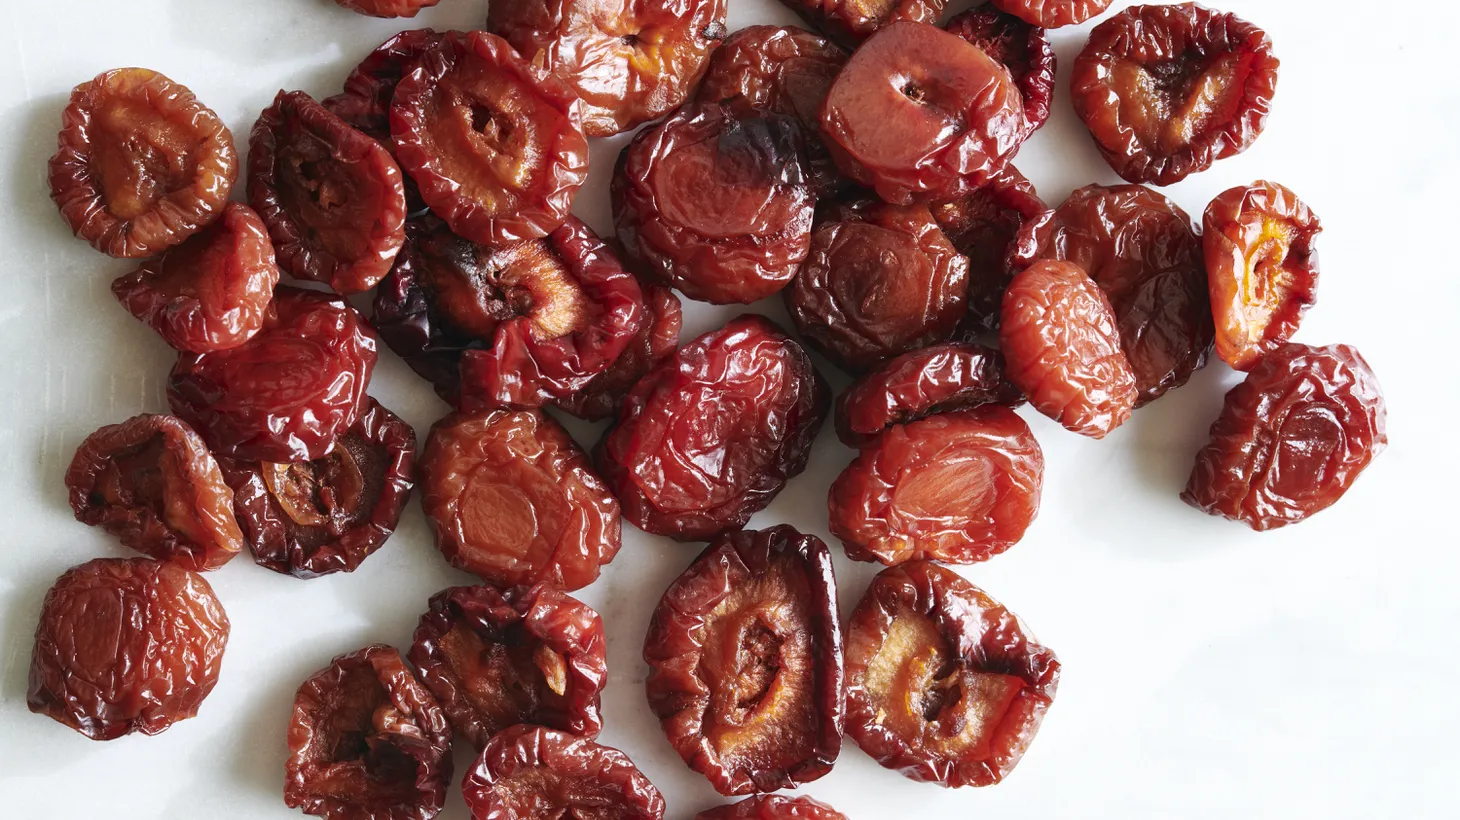 Dried Angelino plums are added to fermented black beans to make a hoisin sauce.